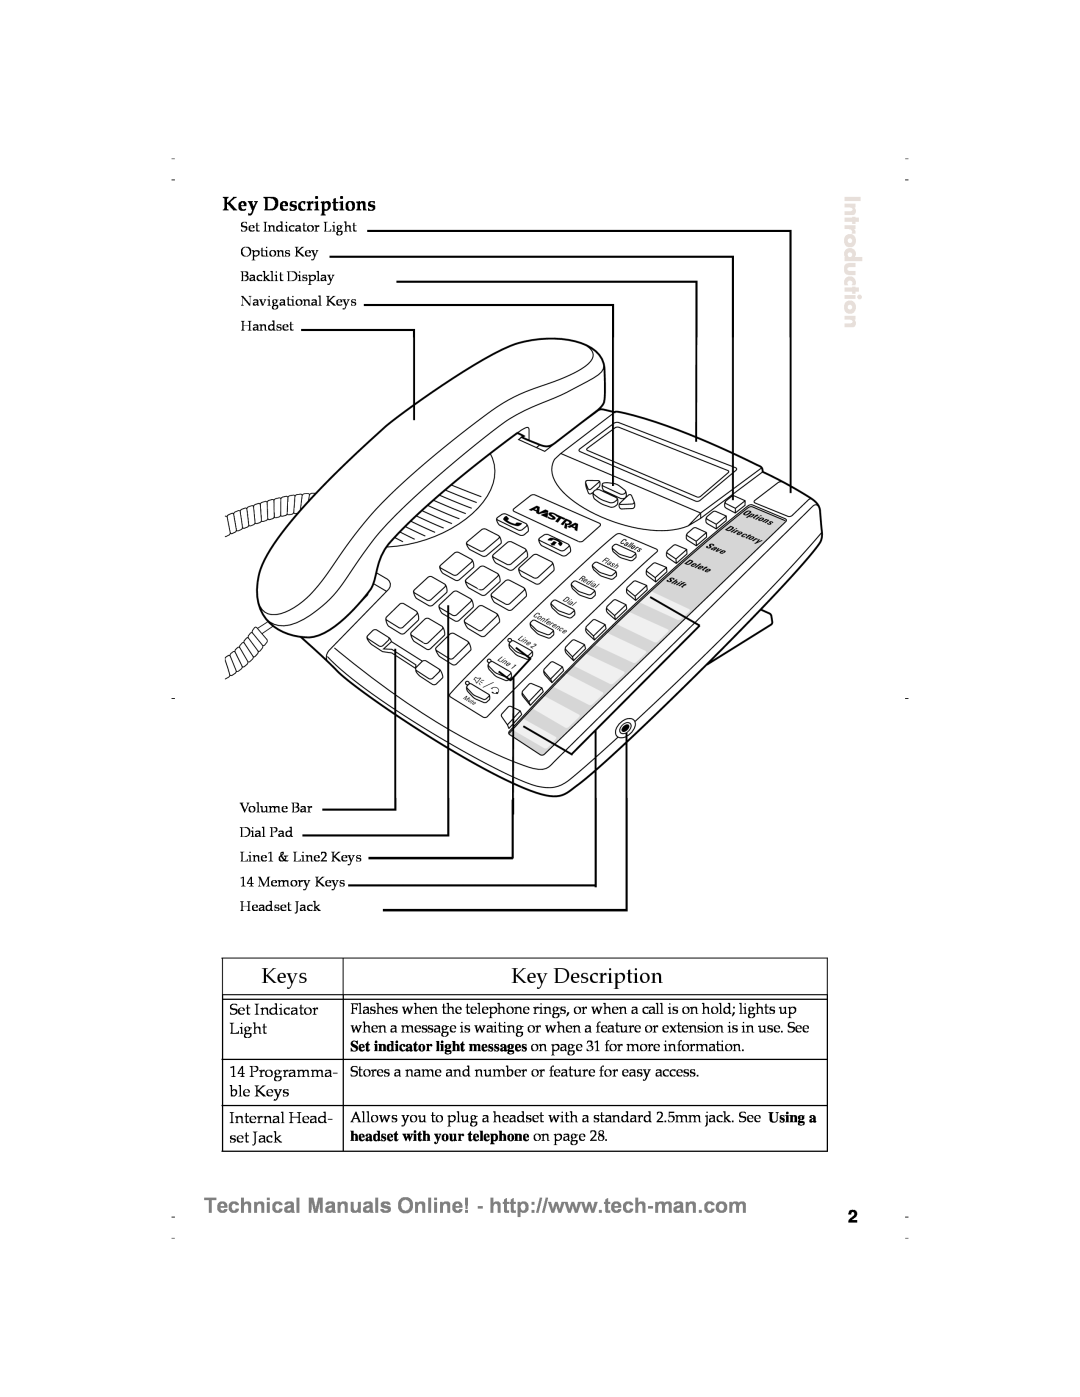 Aastra Telecom 9120 technical manual Keys, Key Descriptions, Introduction, headset with your telephone on page 